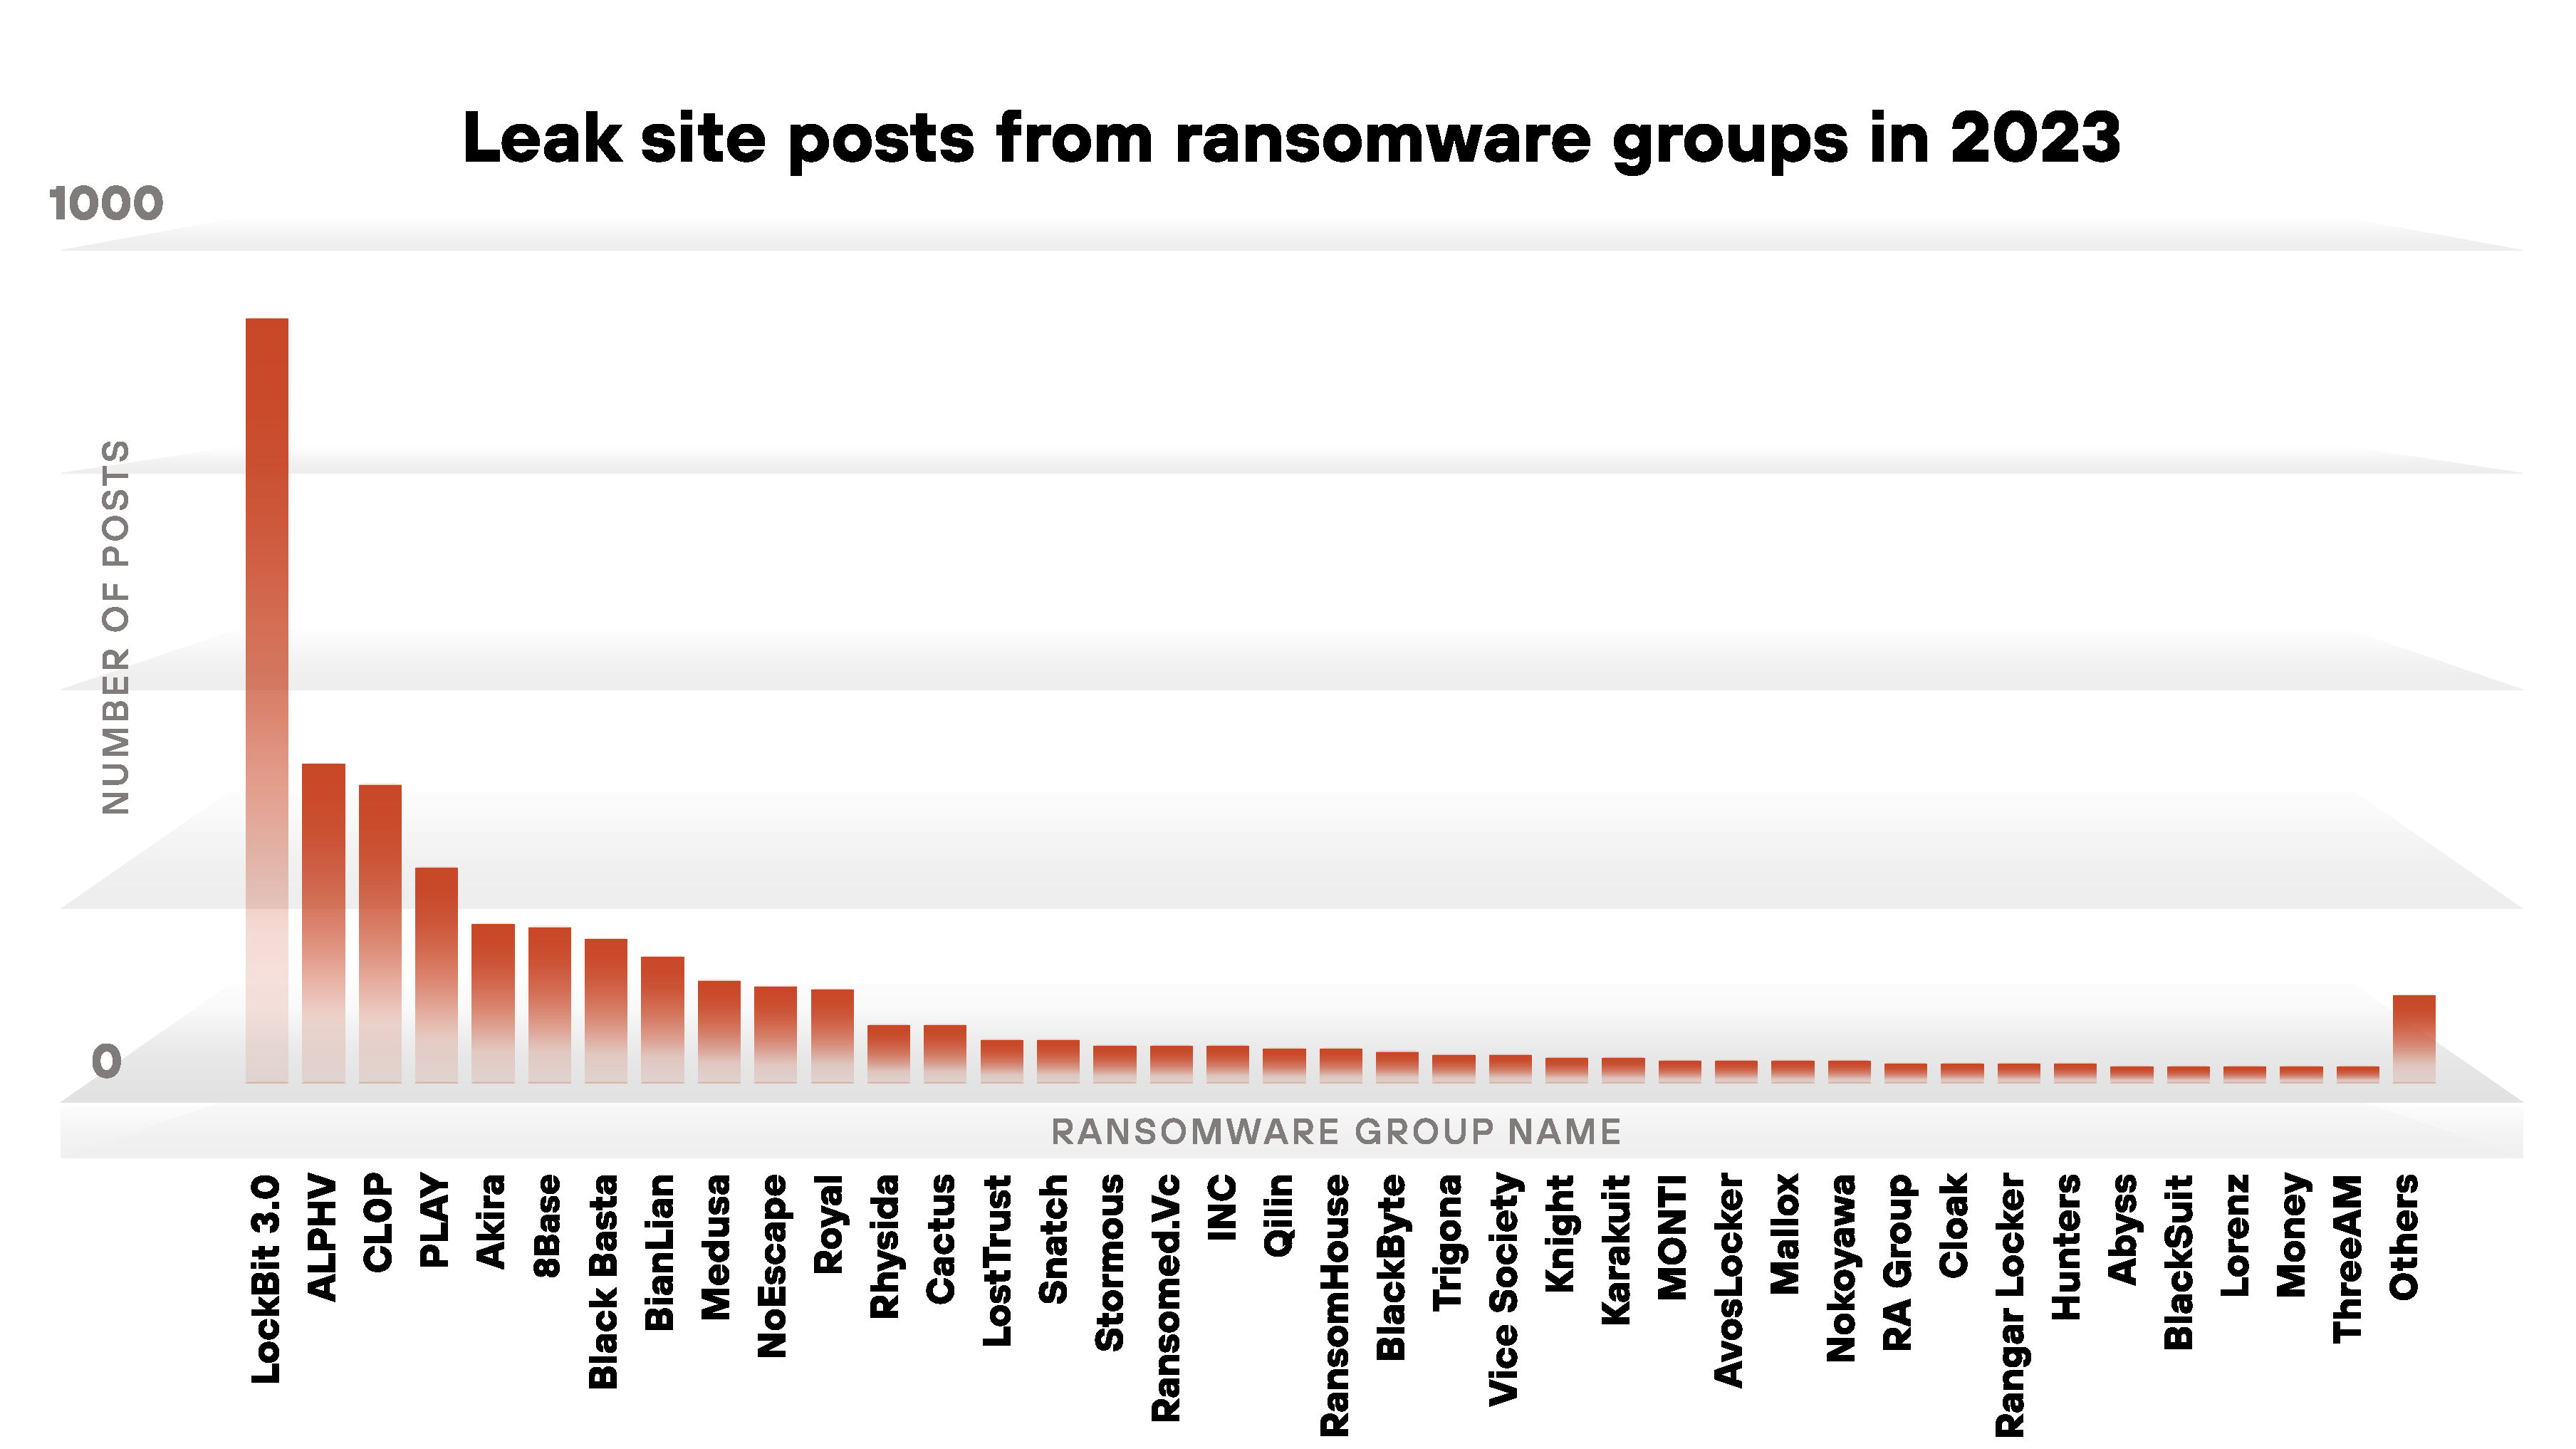 Image 7 is a column chart of post count of all 2023 ransomware leak site posts by group. The top three posts are from LockBit 3.0, ALPHV, Cl0p. LockBit is significantly higher than the rest. 